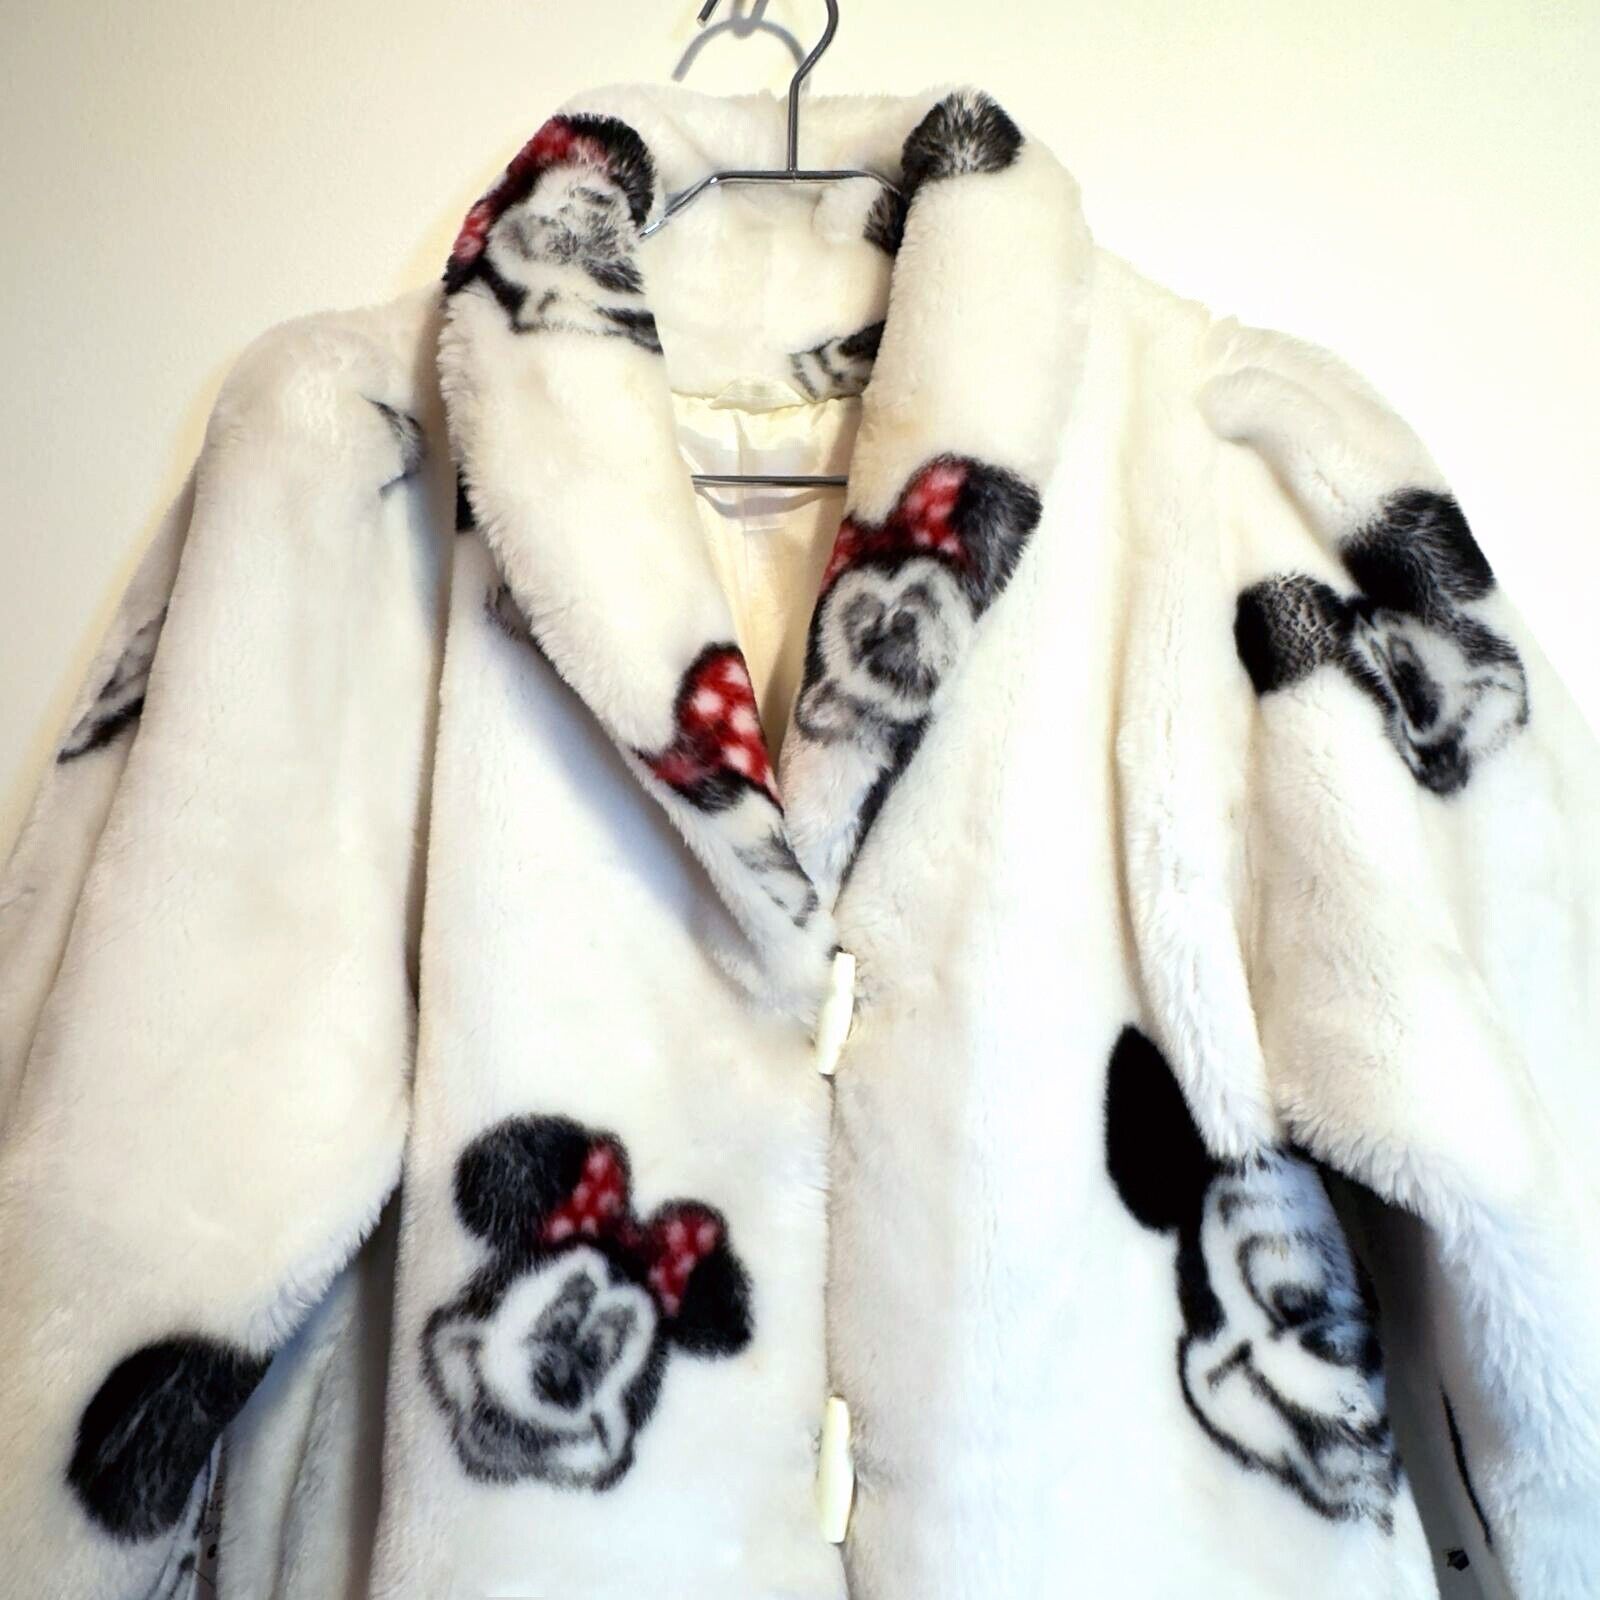 Vintage Apparence Disney Mickey Minnie Fur Print Coat Made In France Late 1970s